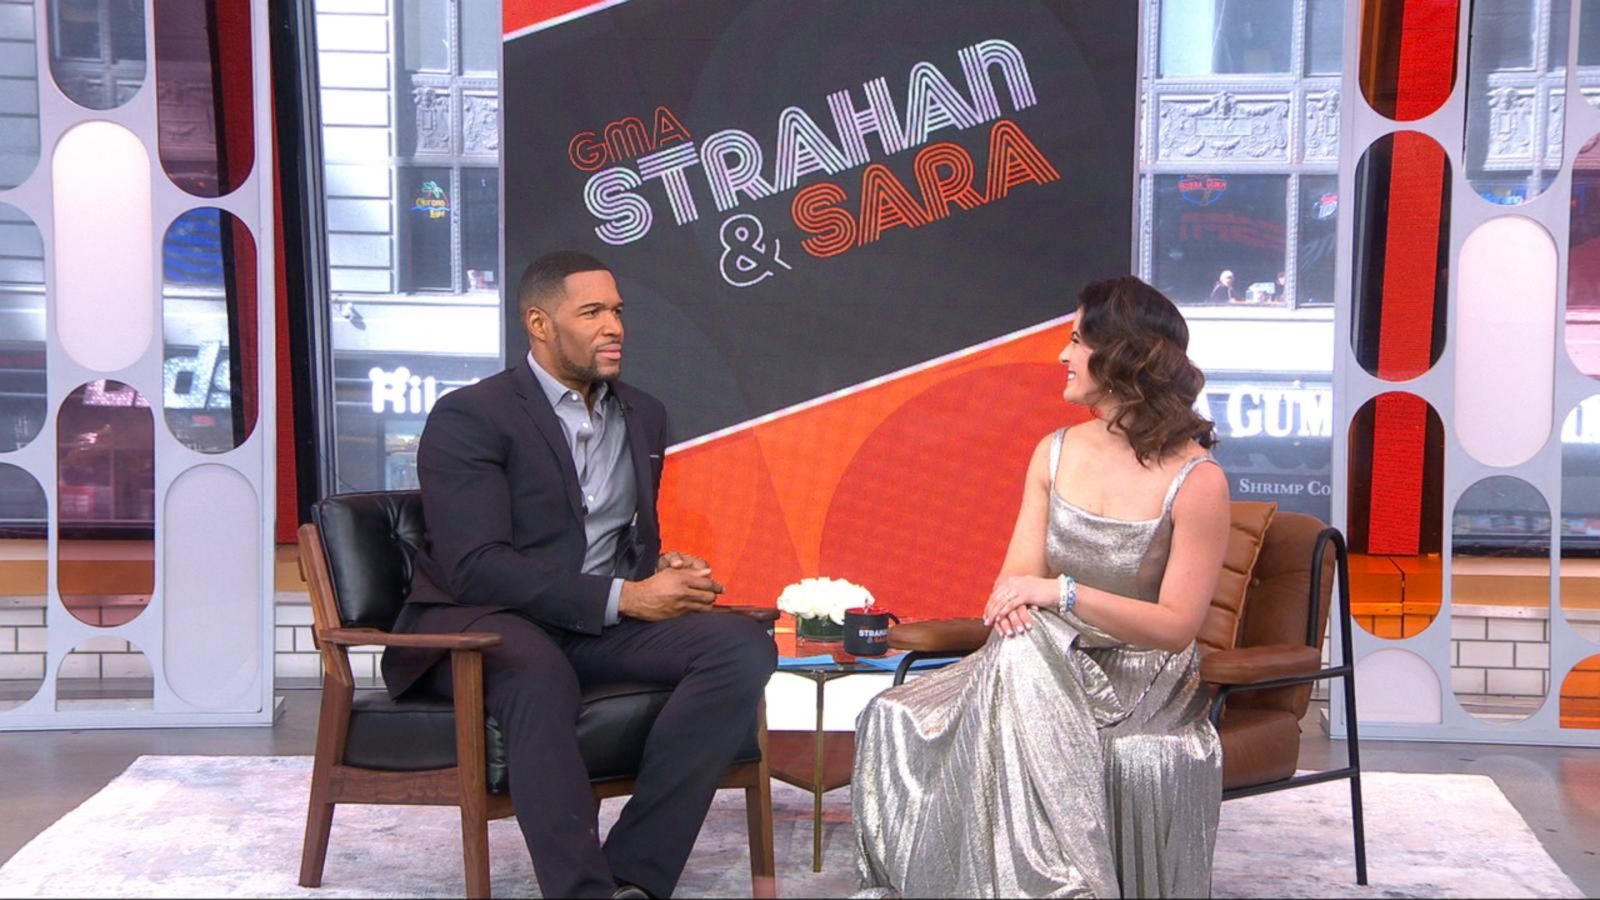 Sara has her own Oscars-style seat filler - Good Morning America